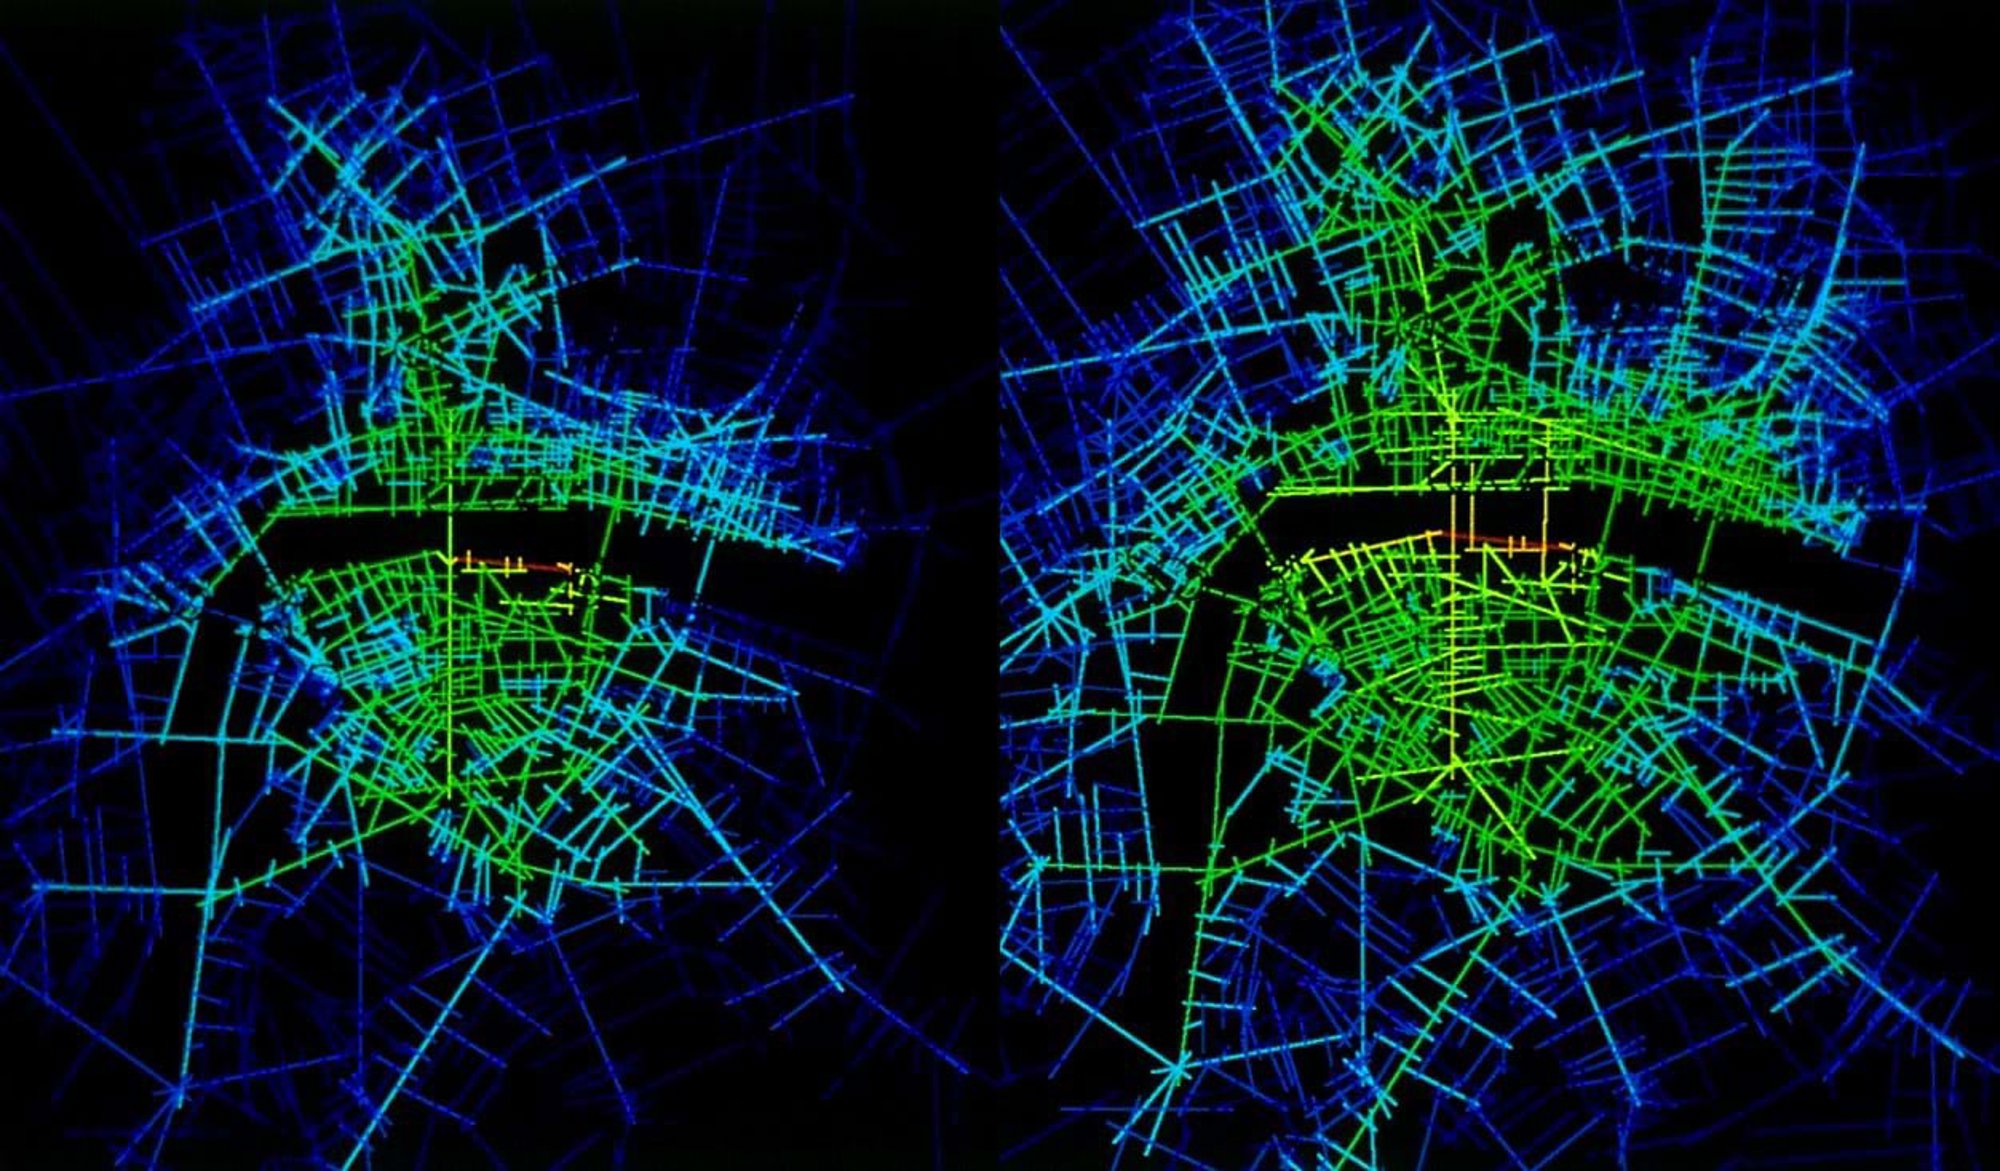 Diagrams by Space Syntax, University College London, showing the distribution of pedestrian traffic in the St Paul’s and Bankside areas before (left) and after (right) the completion of the Bridge. © Space Syntax